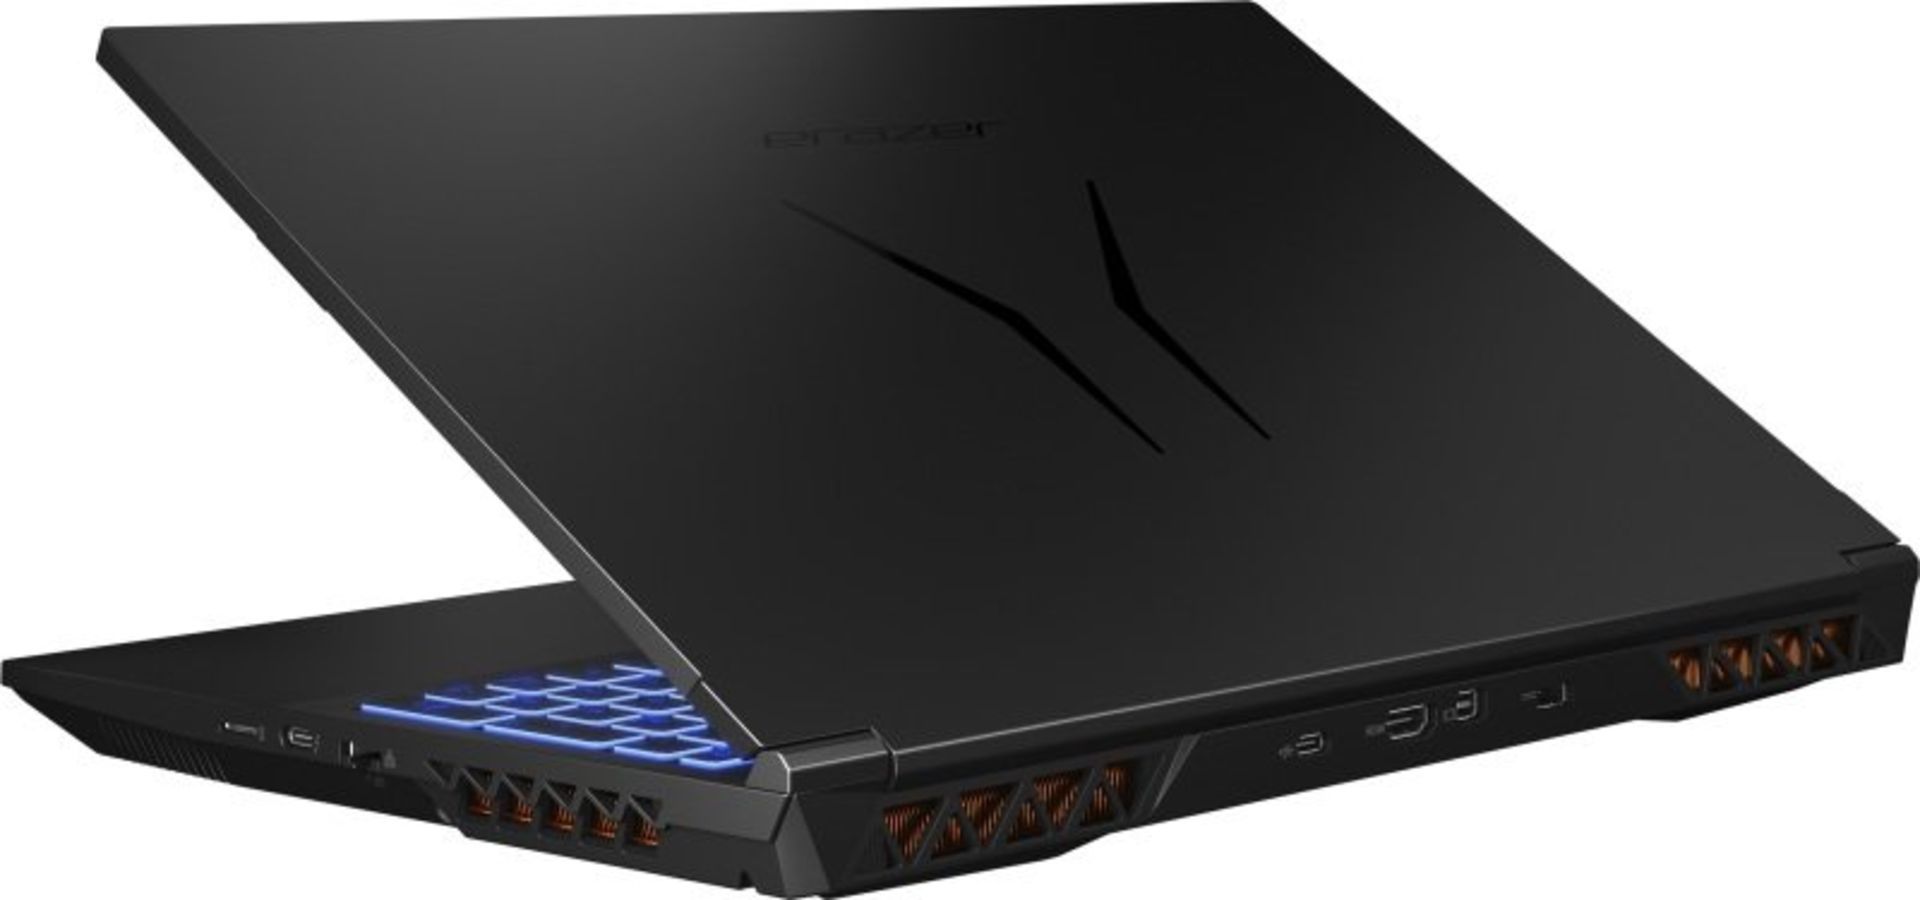 NEW & BOXED MEDION Erazer Deputy P50 - MD 62533 Gaming Laptop. RRP £1306.66. Intel Core i7-12700H, - Image 6 of 6